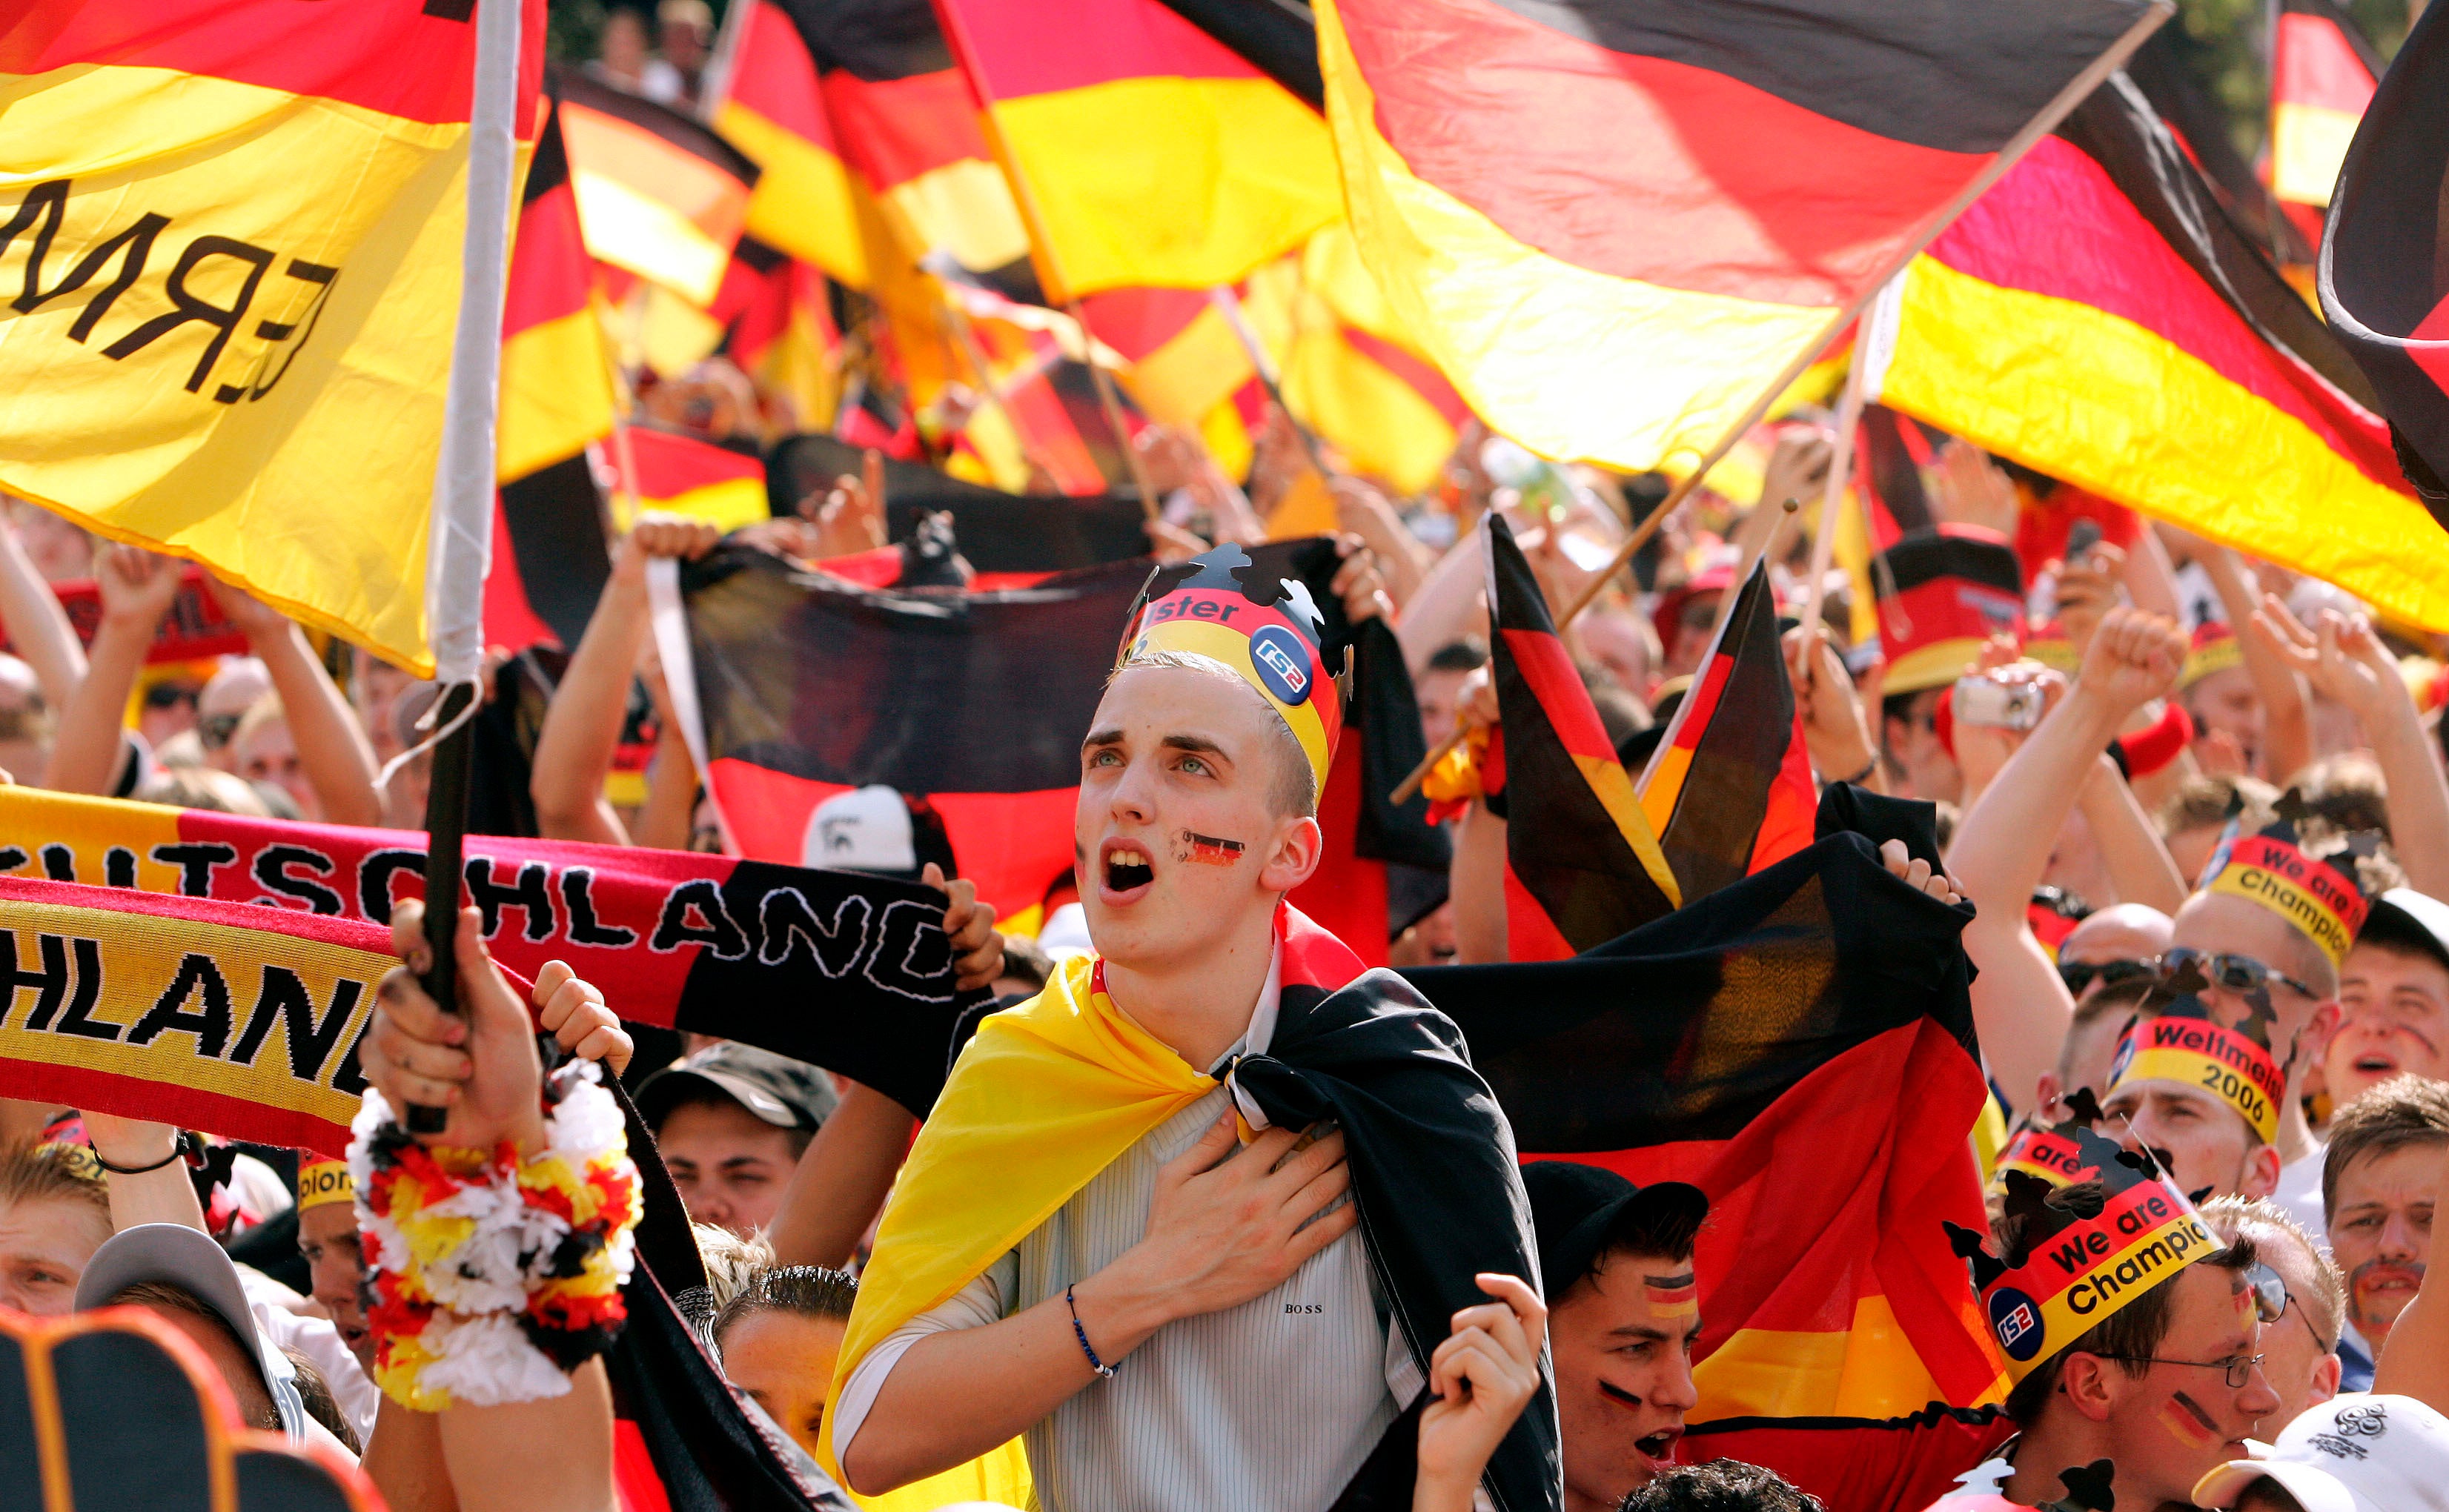 Germany is hosting its first major men’s tournament since the 2006 World Cup